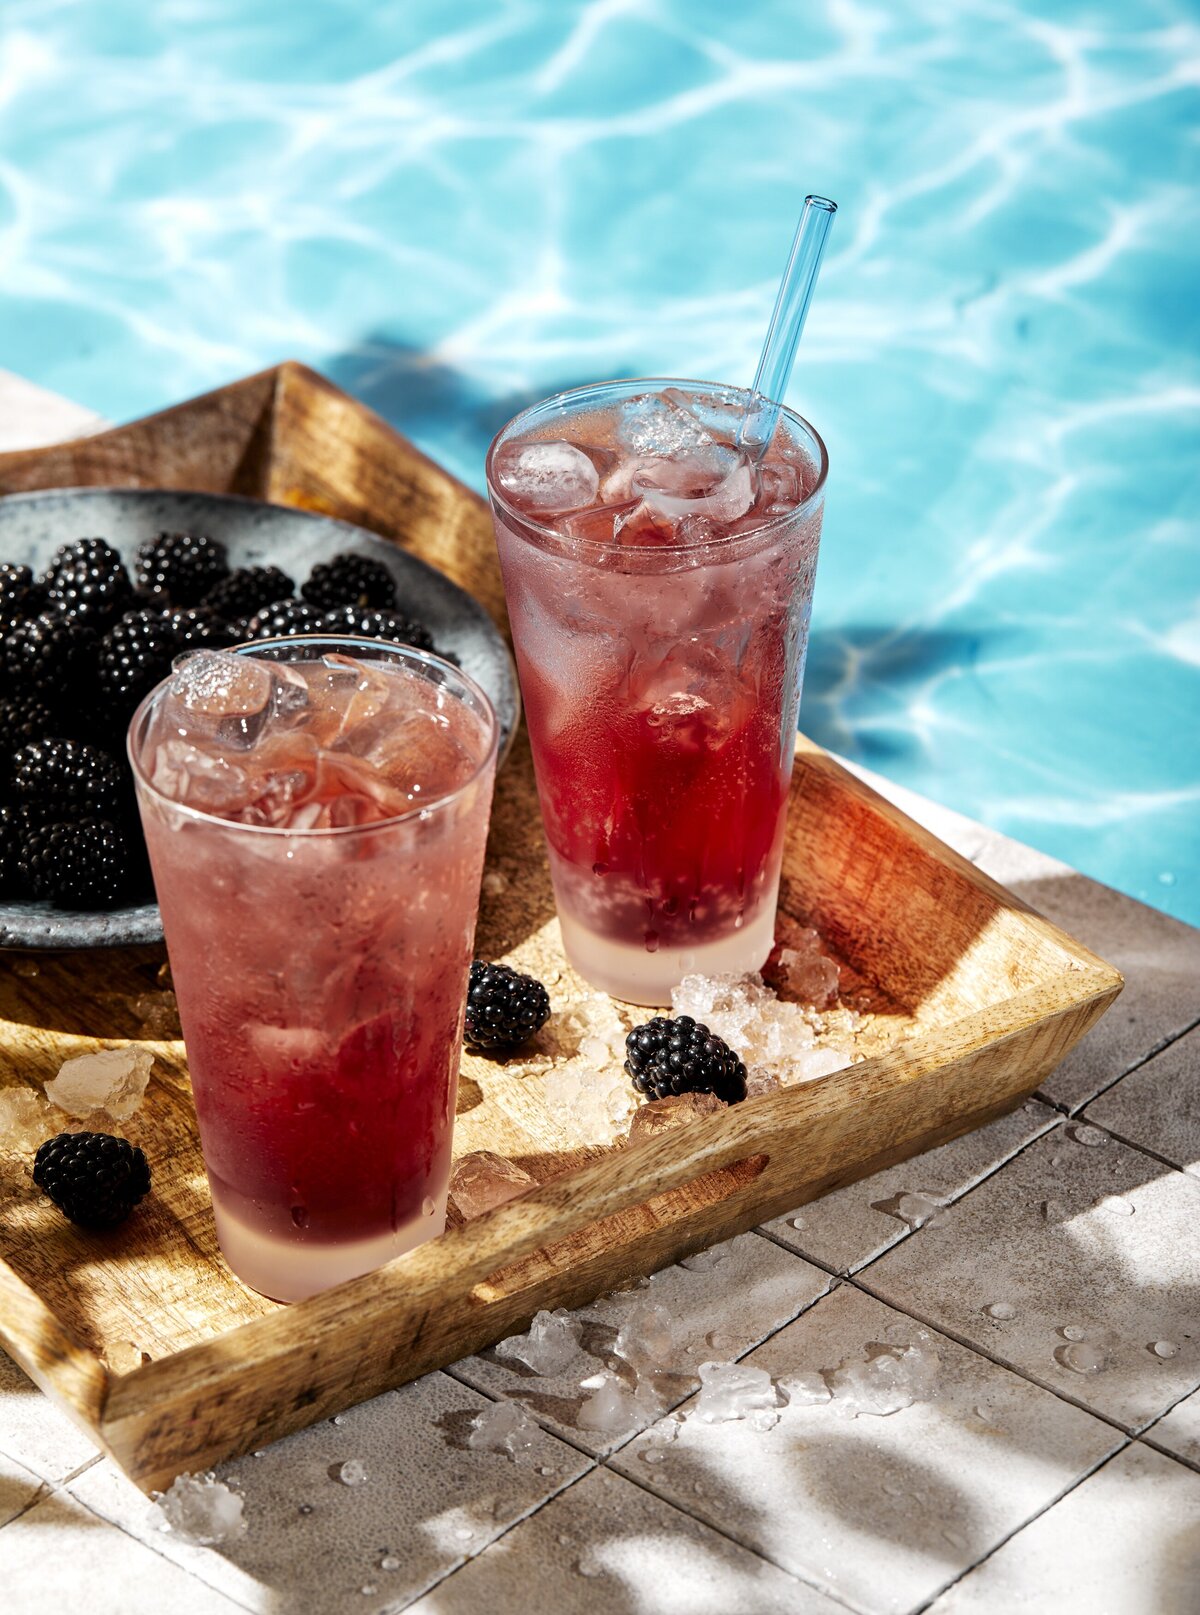 Two glasses of a berry drink with blackberries sitting next to a pool.